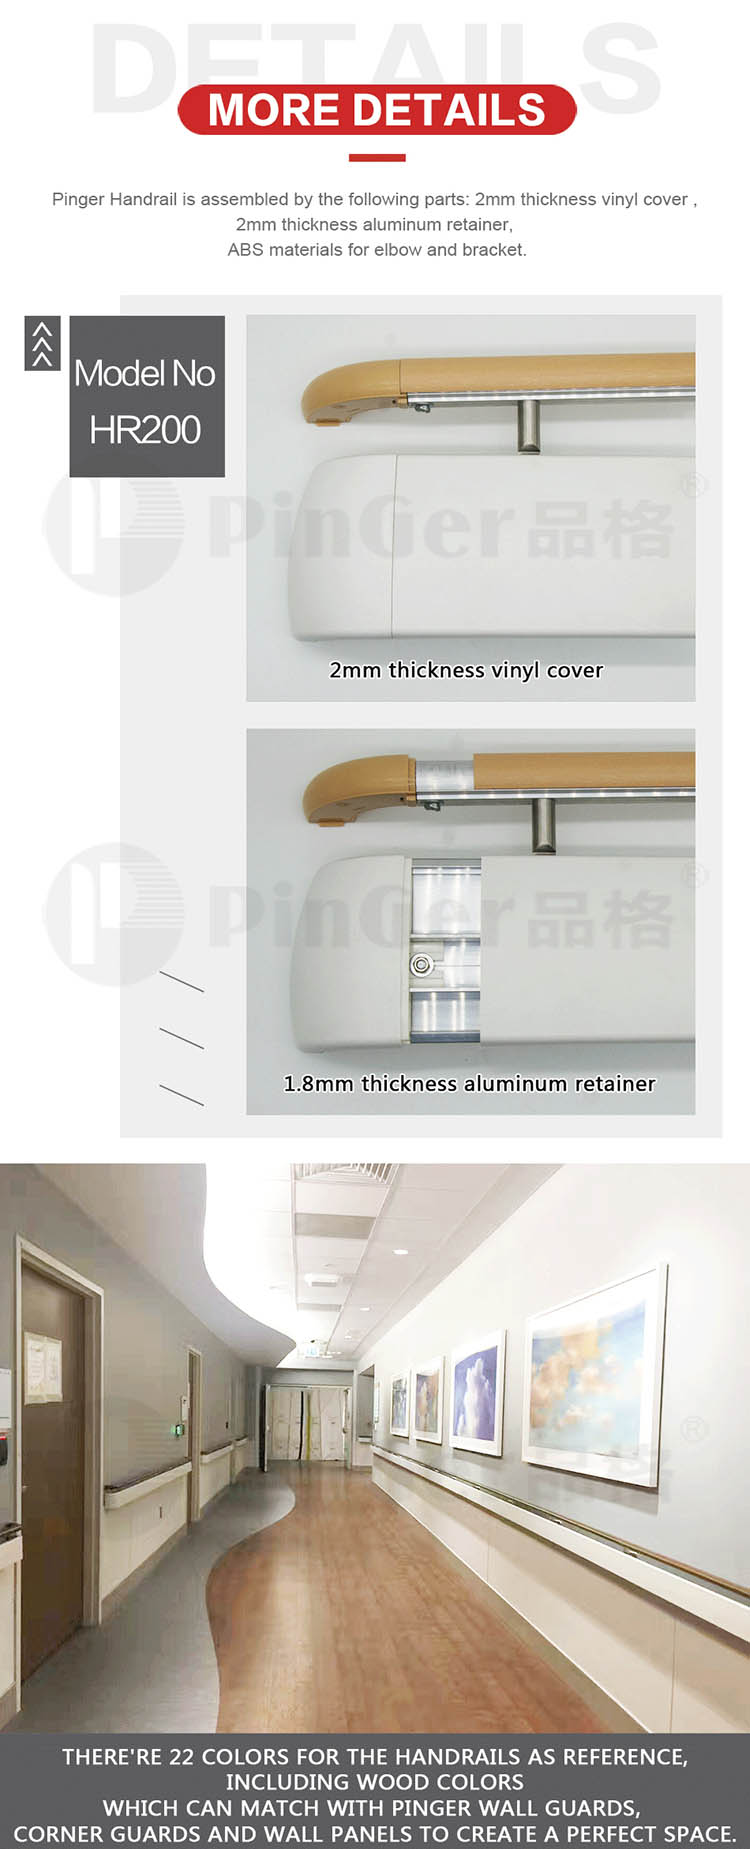 Fired proof wall protection handrail in hospital